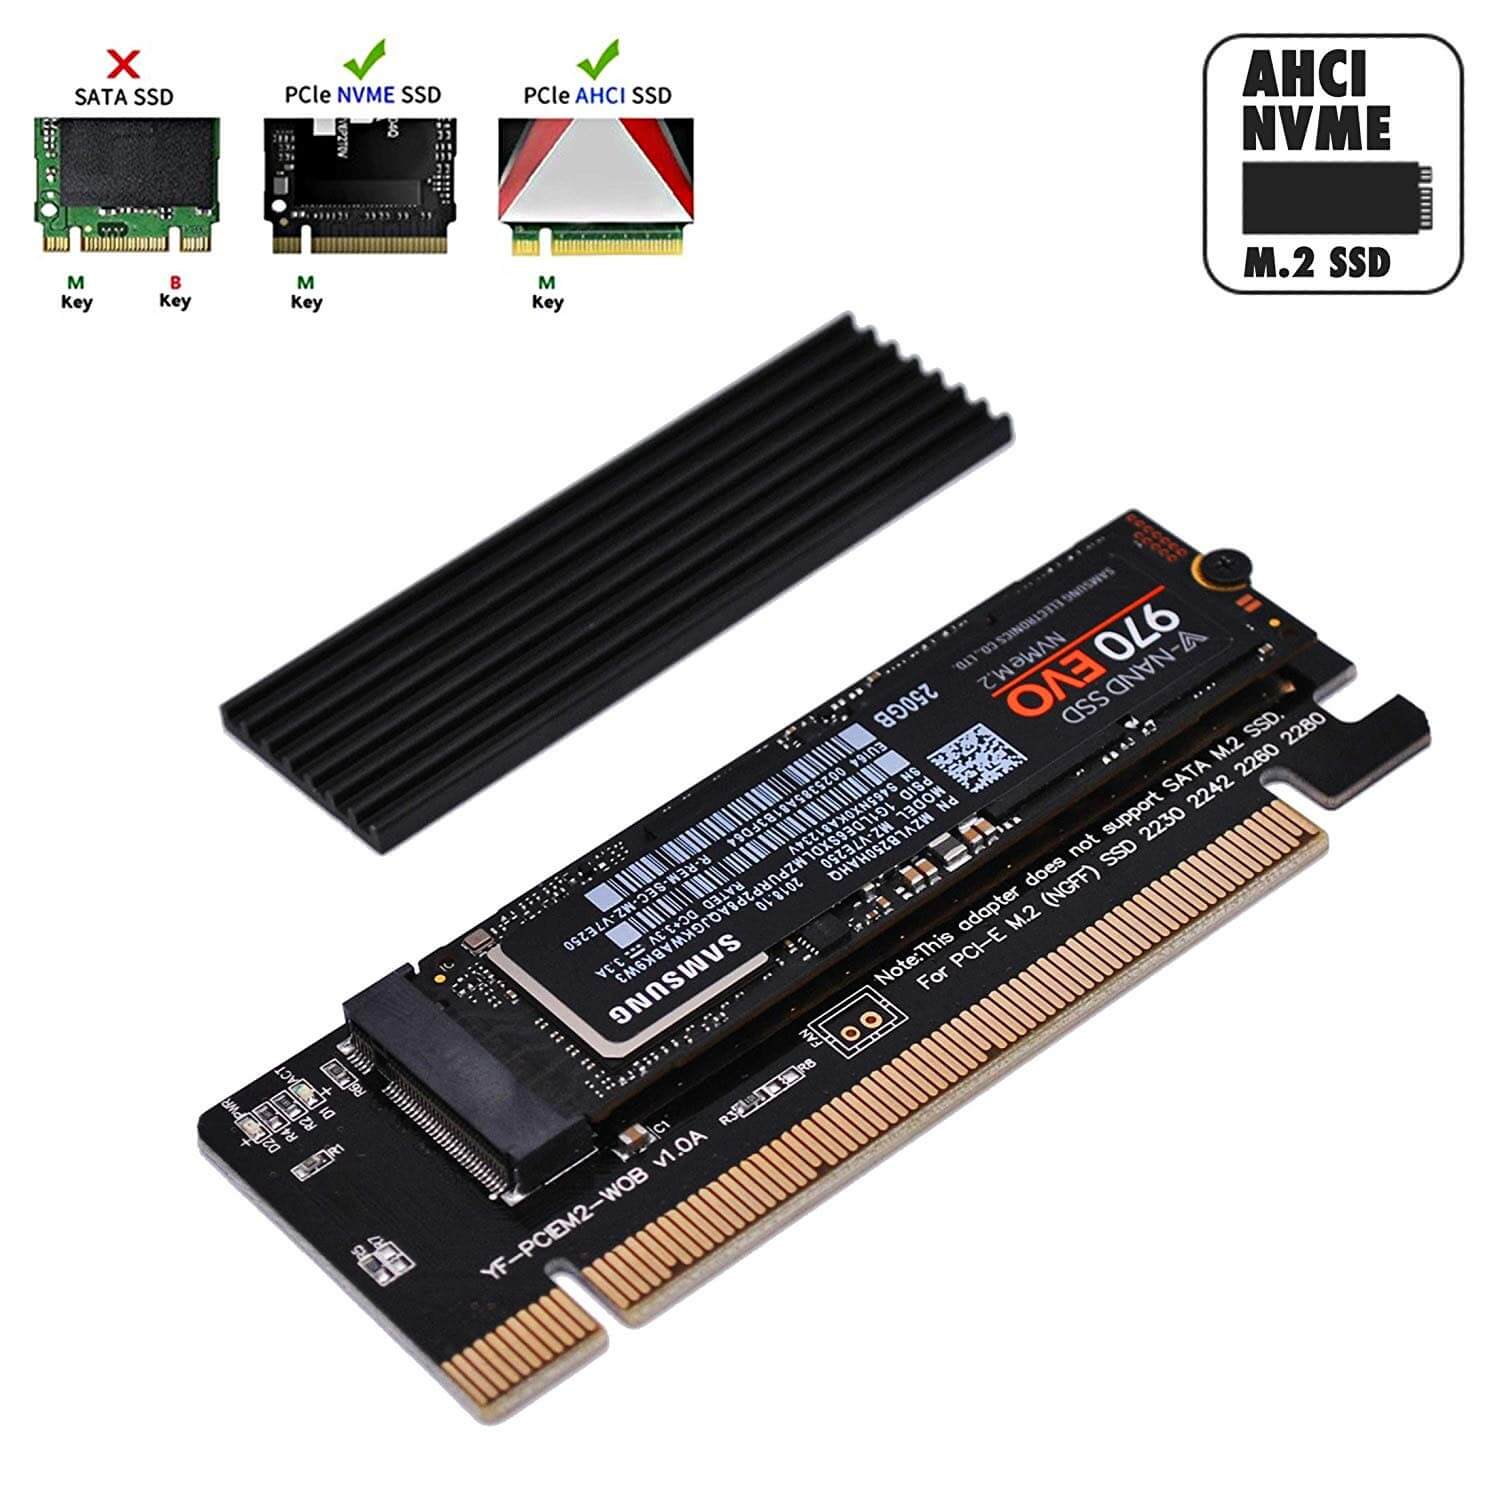 Adaptateur M.2 NVME SSD vers PCI Express - Third Party